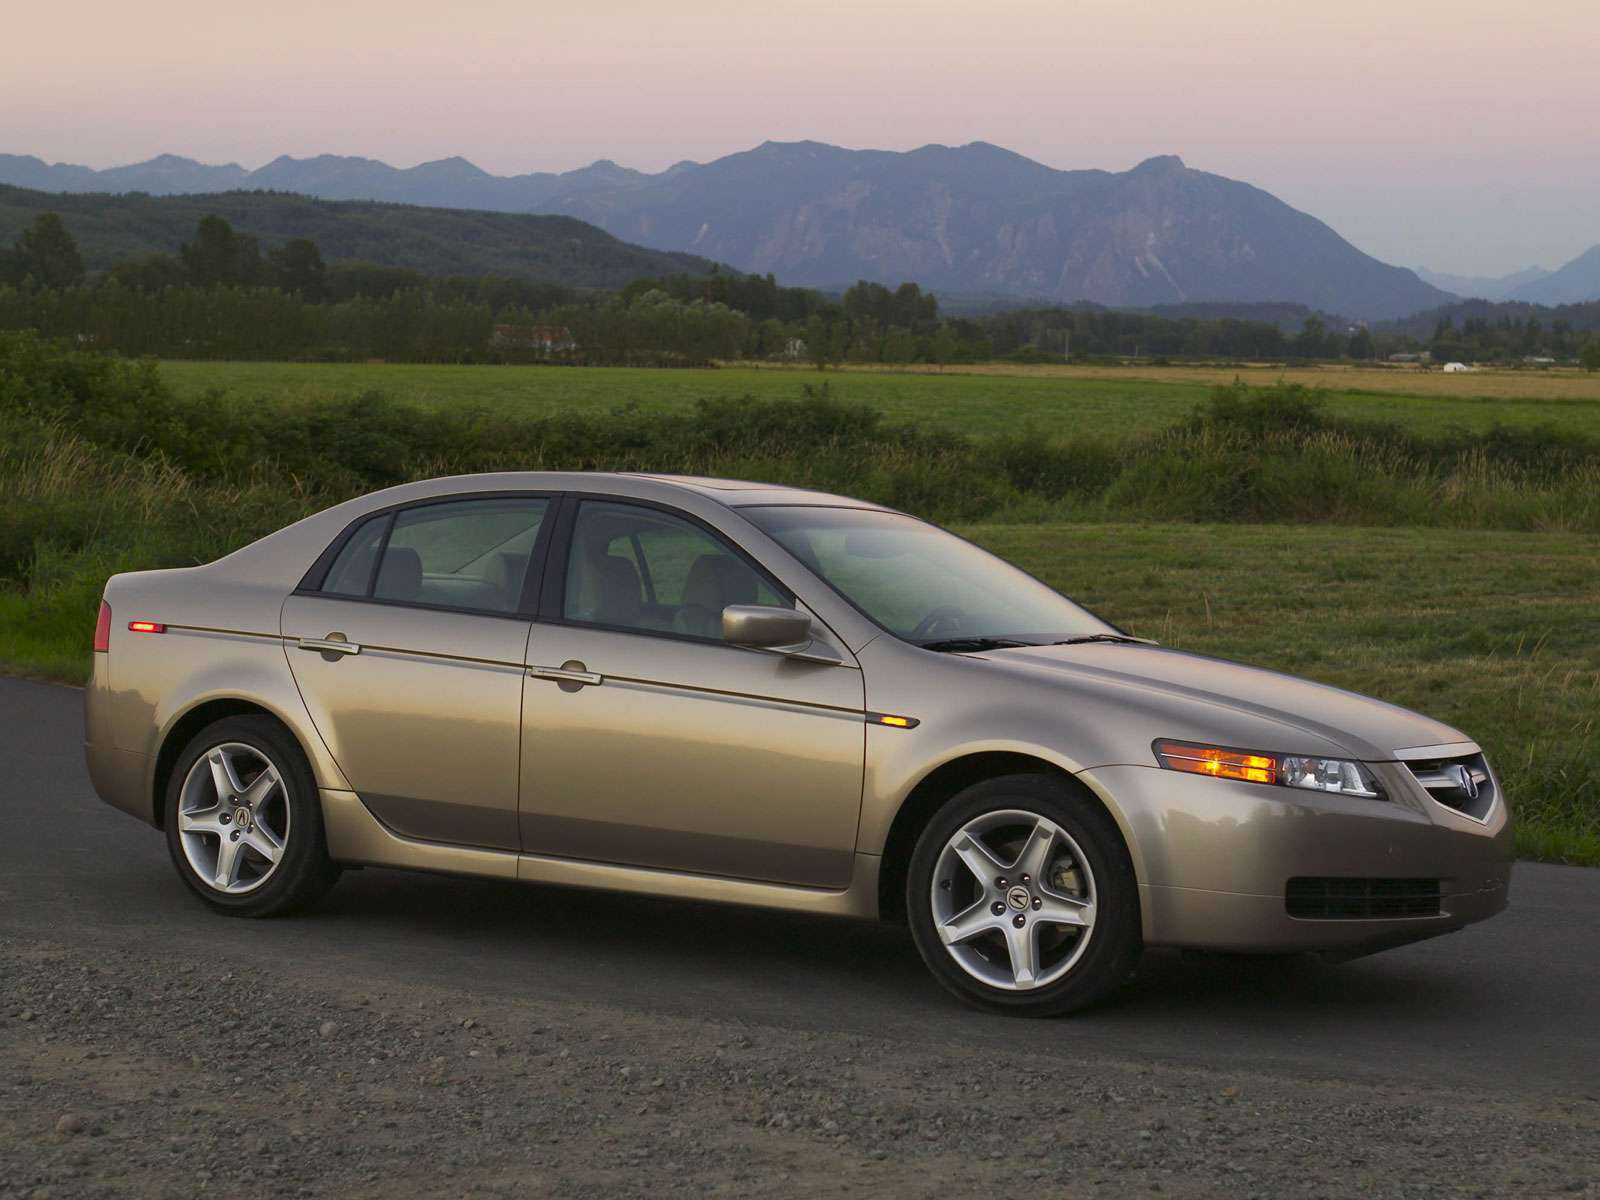 2005 Acura TL Japanese car wallpapers, overview